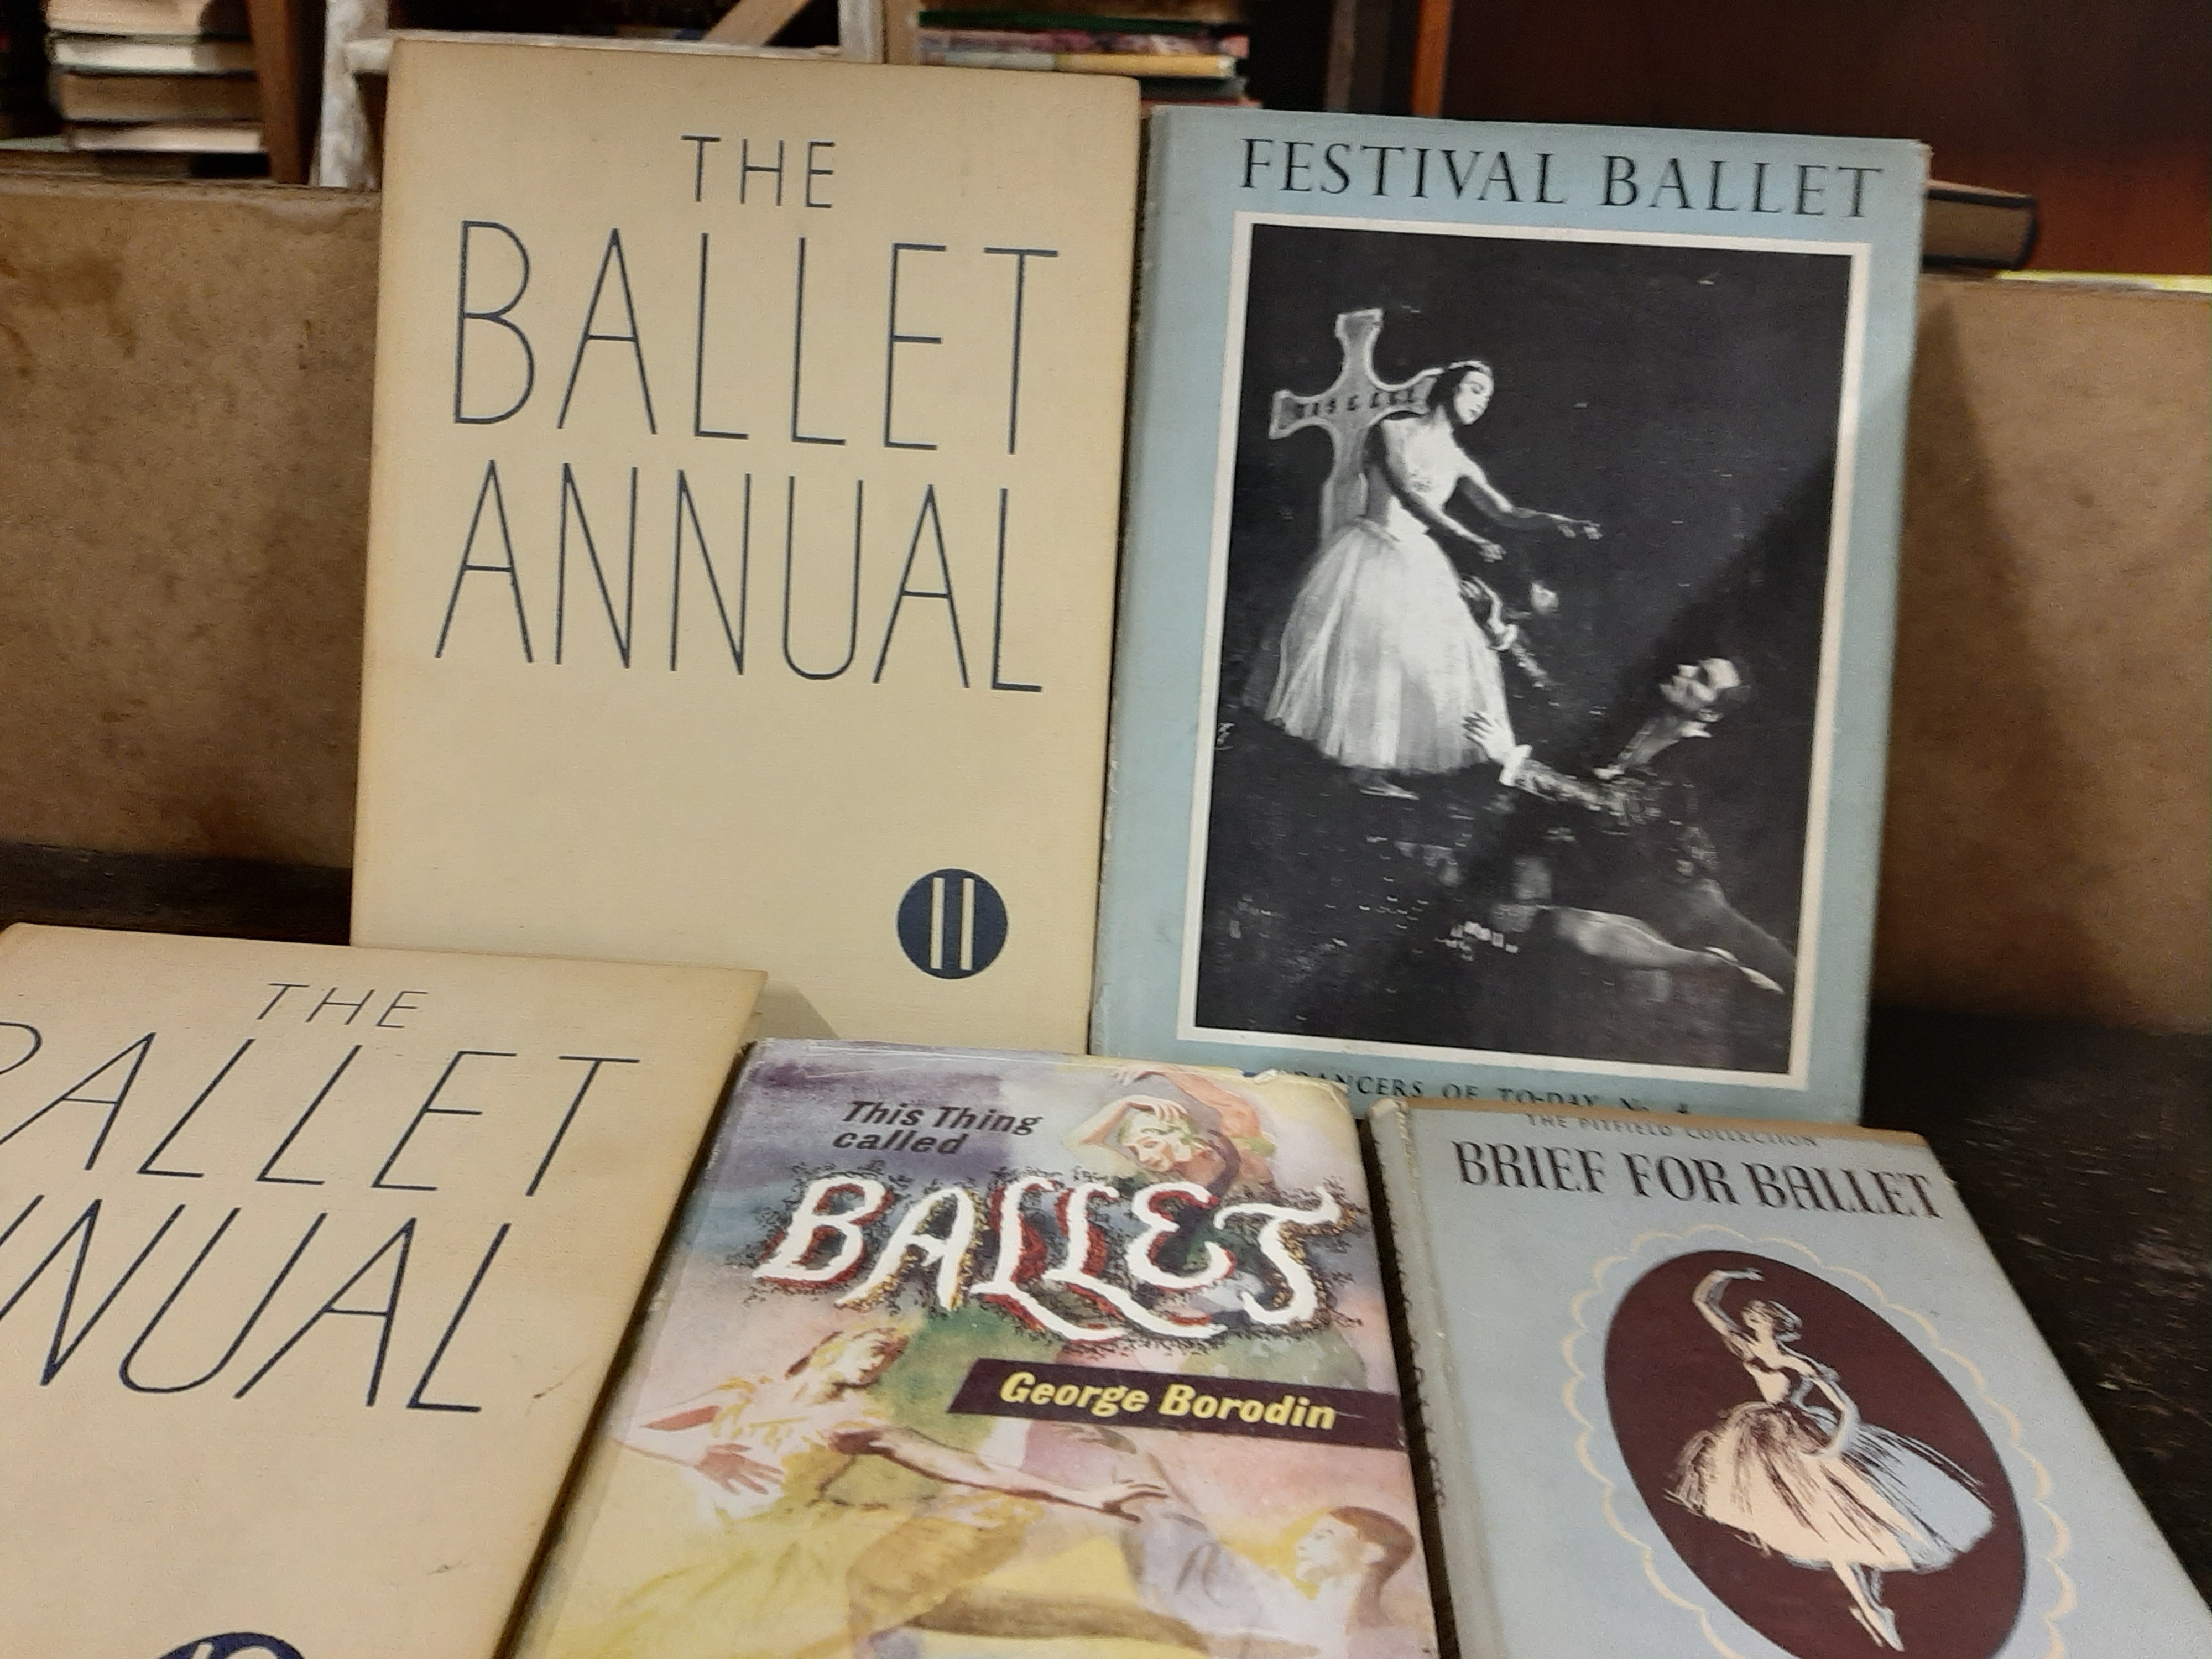 22 ballet related books to include Footnotes to the Ballet by Caryl Brahms, Ballet Traditional to